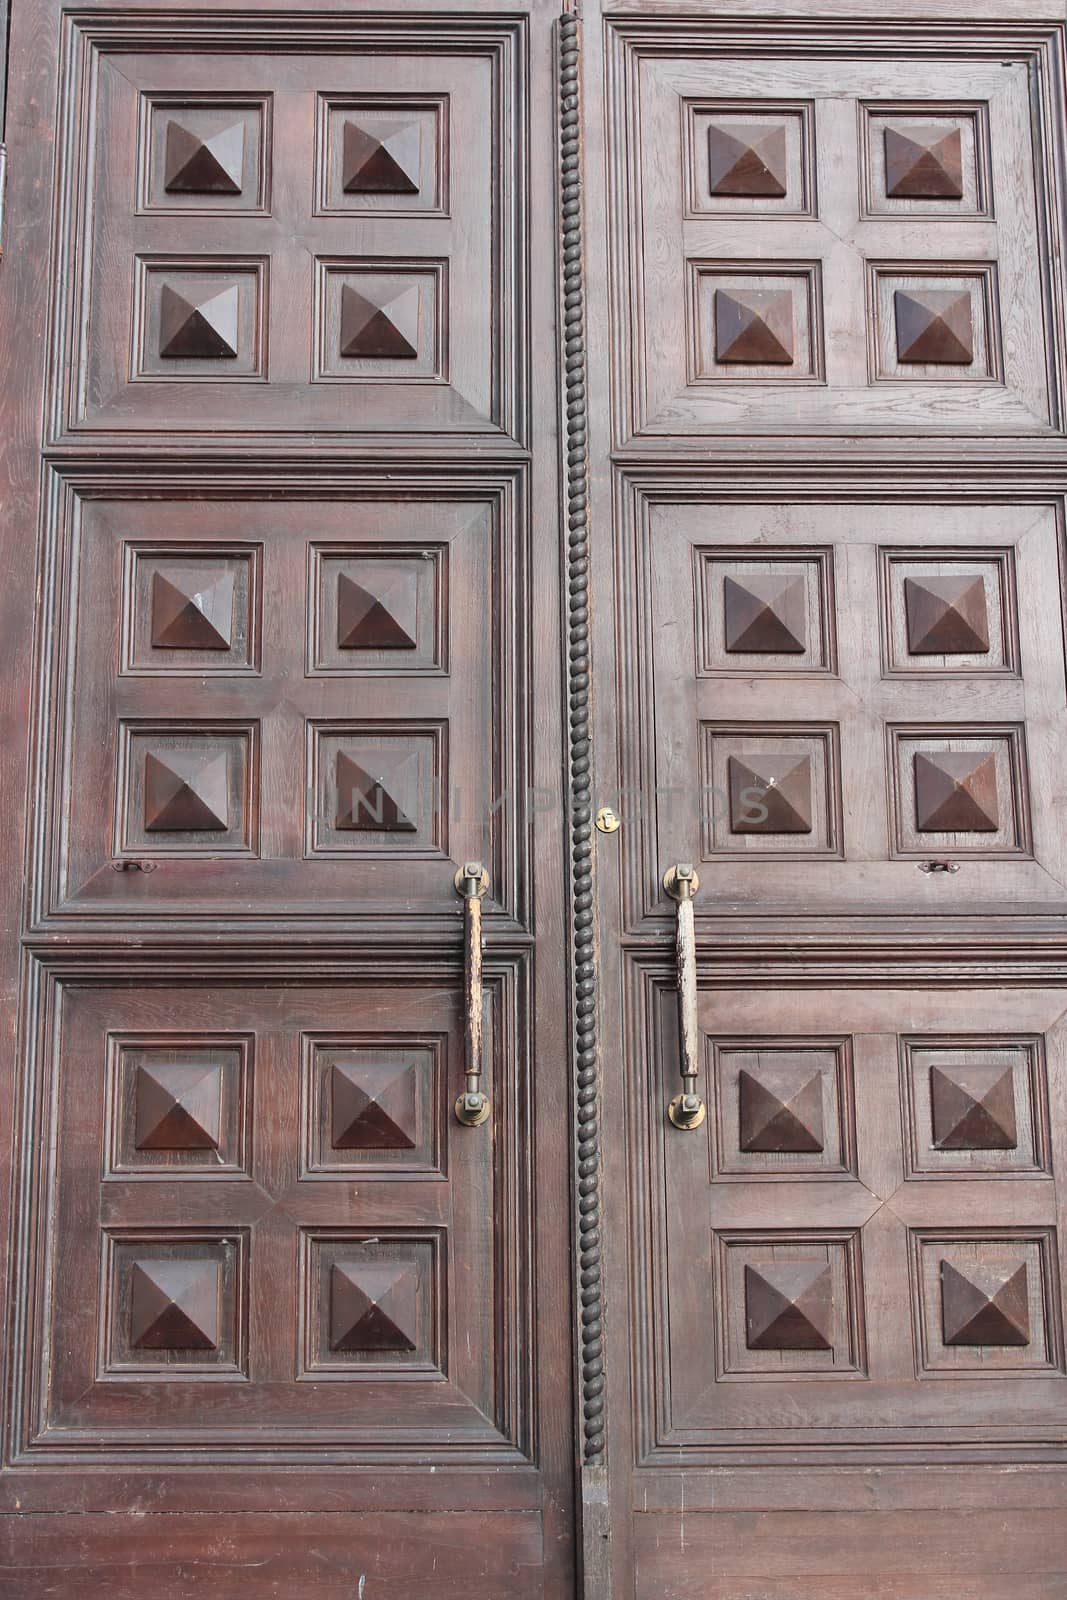 massive church doors with old nice pattern